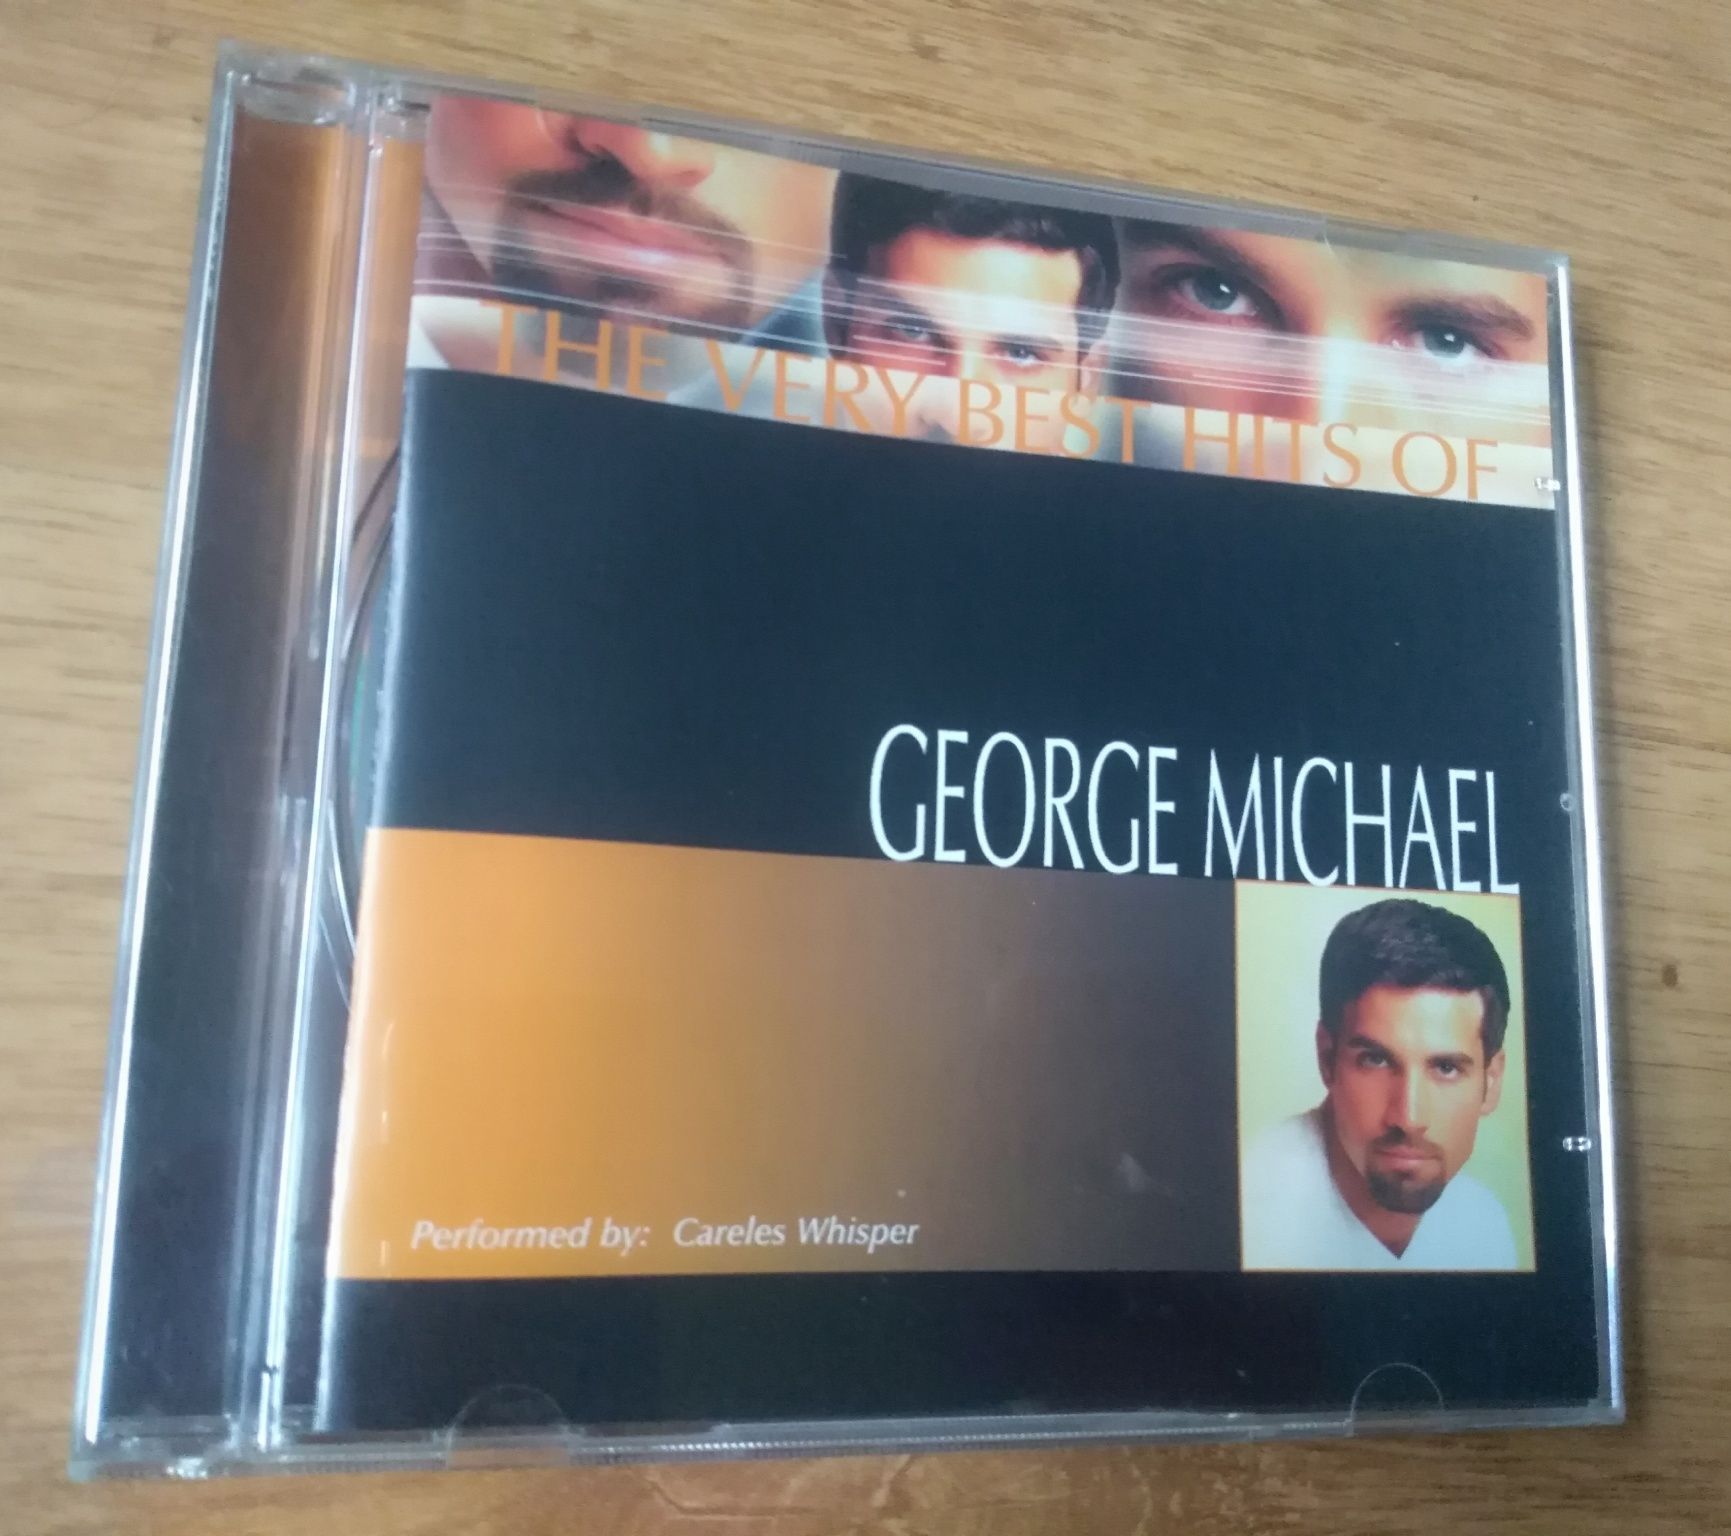 George Michael, The Very Best Hits Of, 2000r., CD